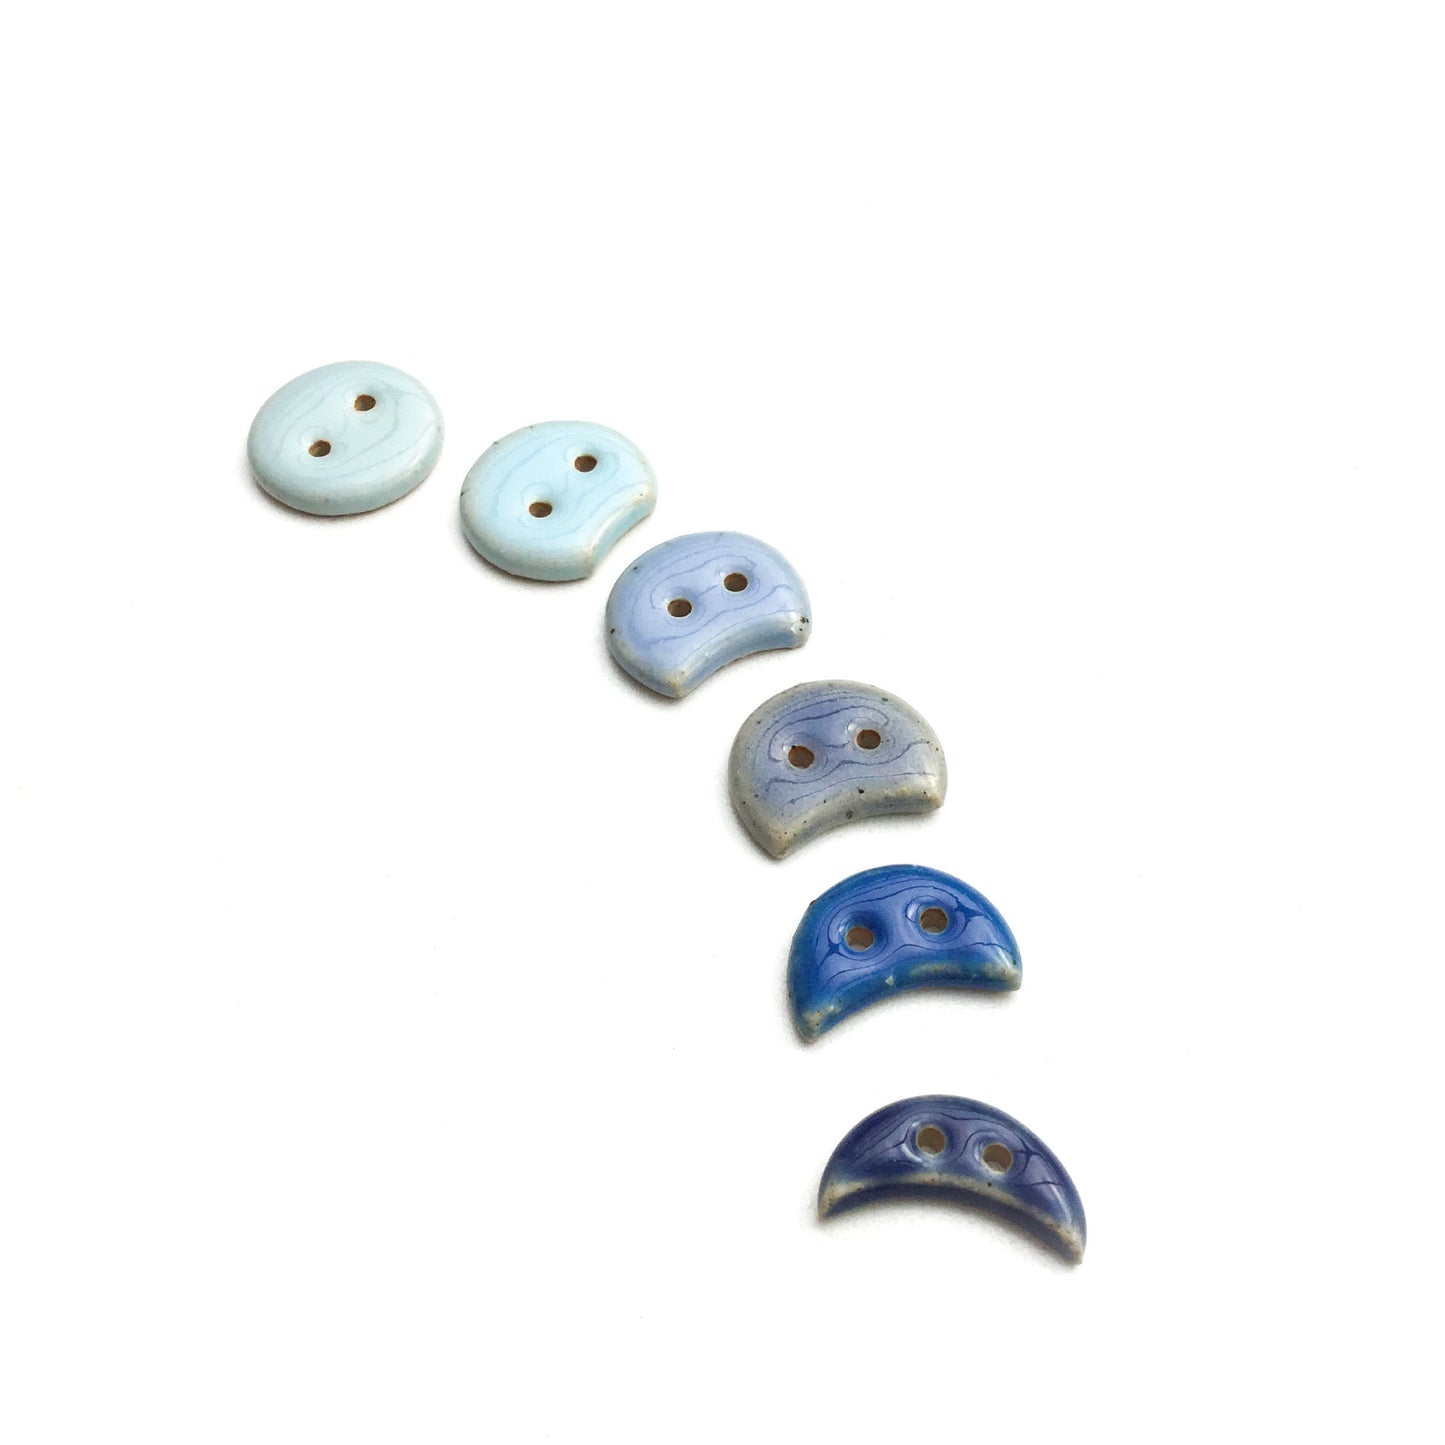 Blue Moon Phase Ceramic Buttons - 3/4" - 6 Pack